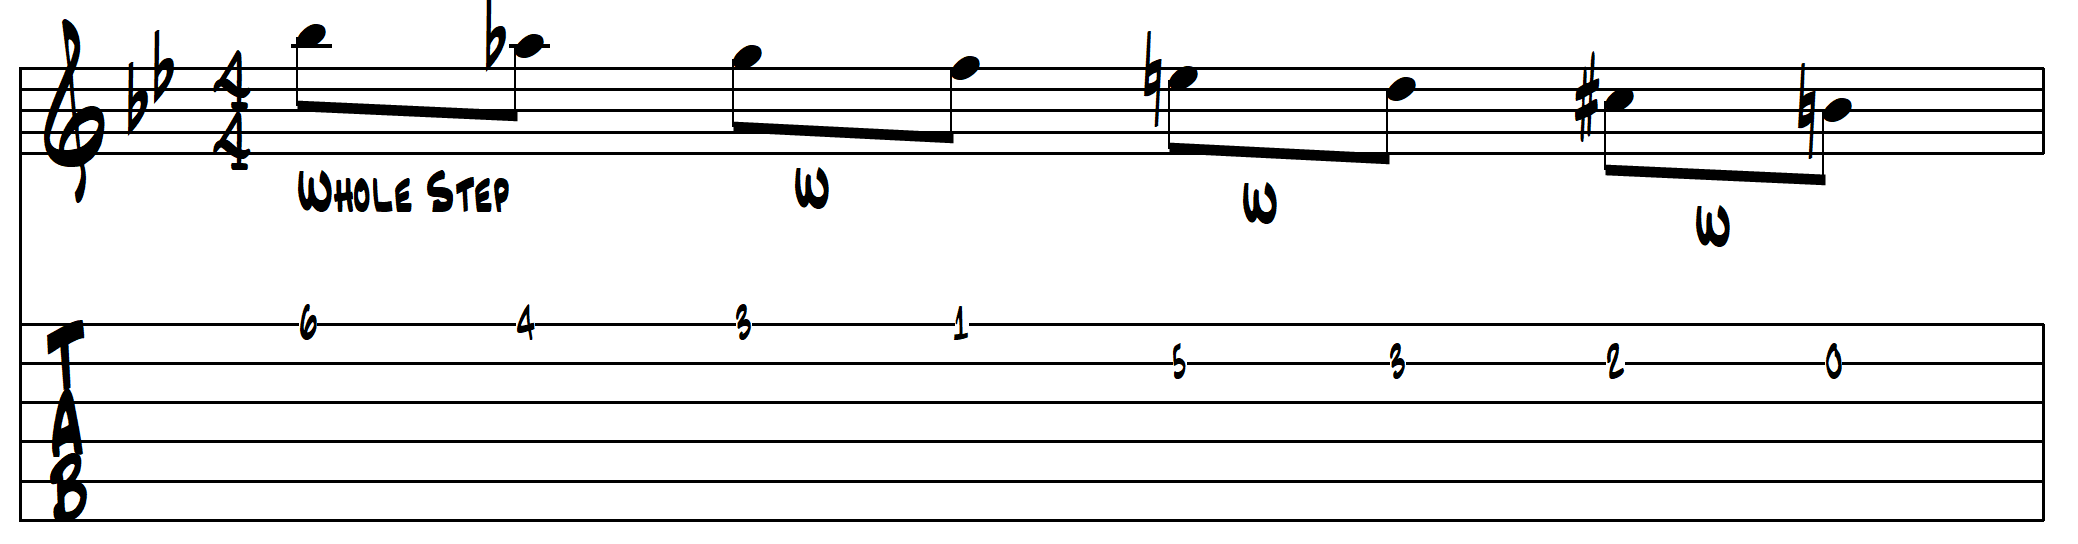 Descending one-octave Bb Diminished Scale